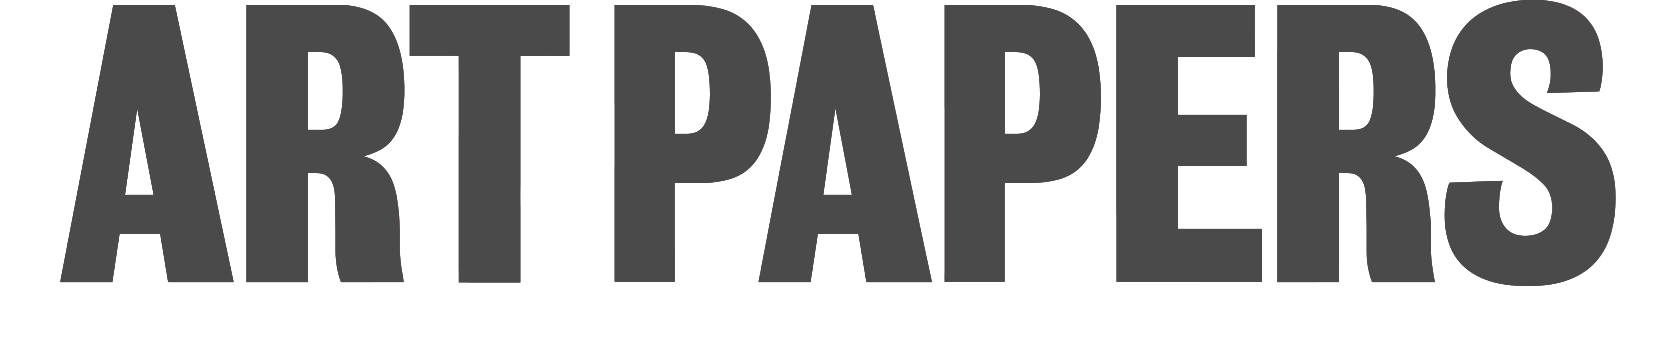 ArtPapers_logo_Gray_1676x346-1.png